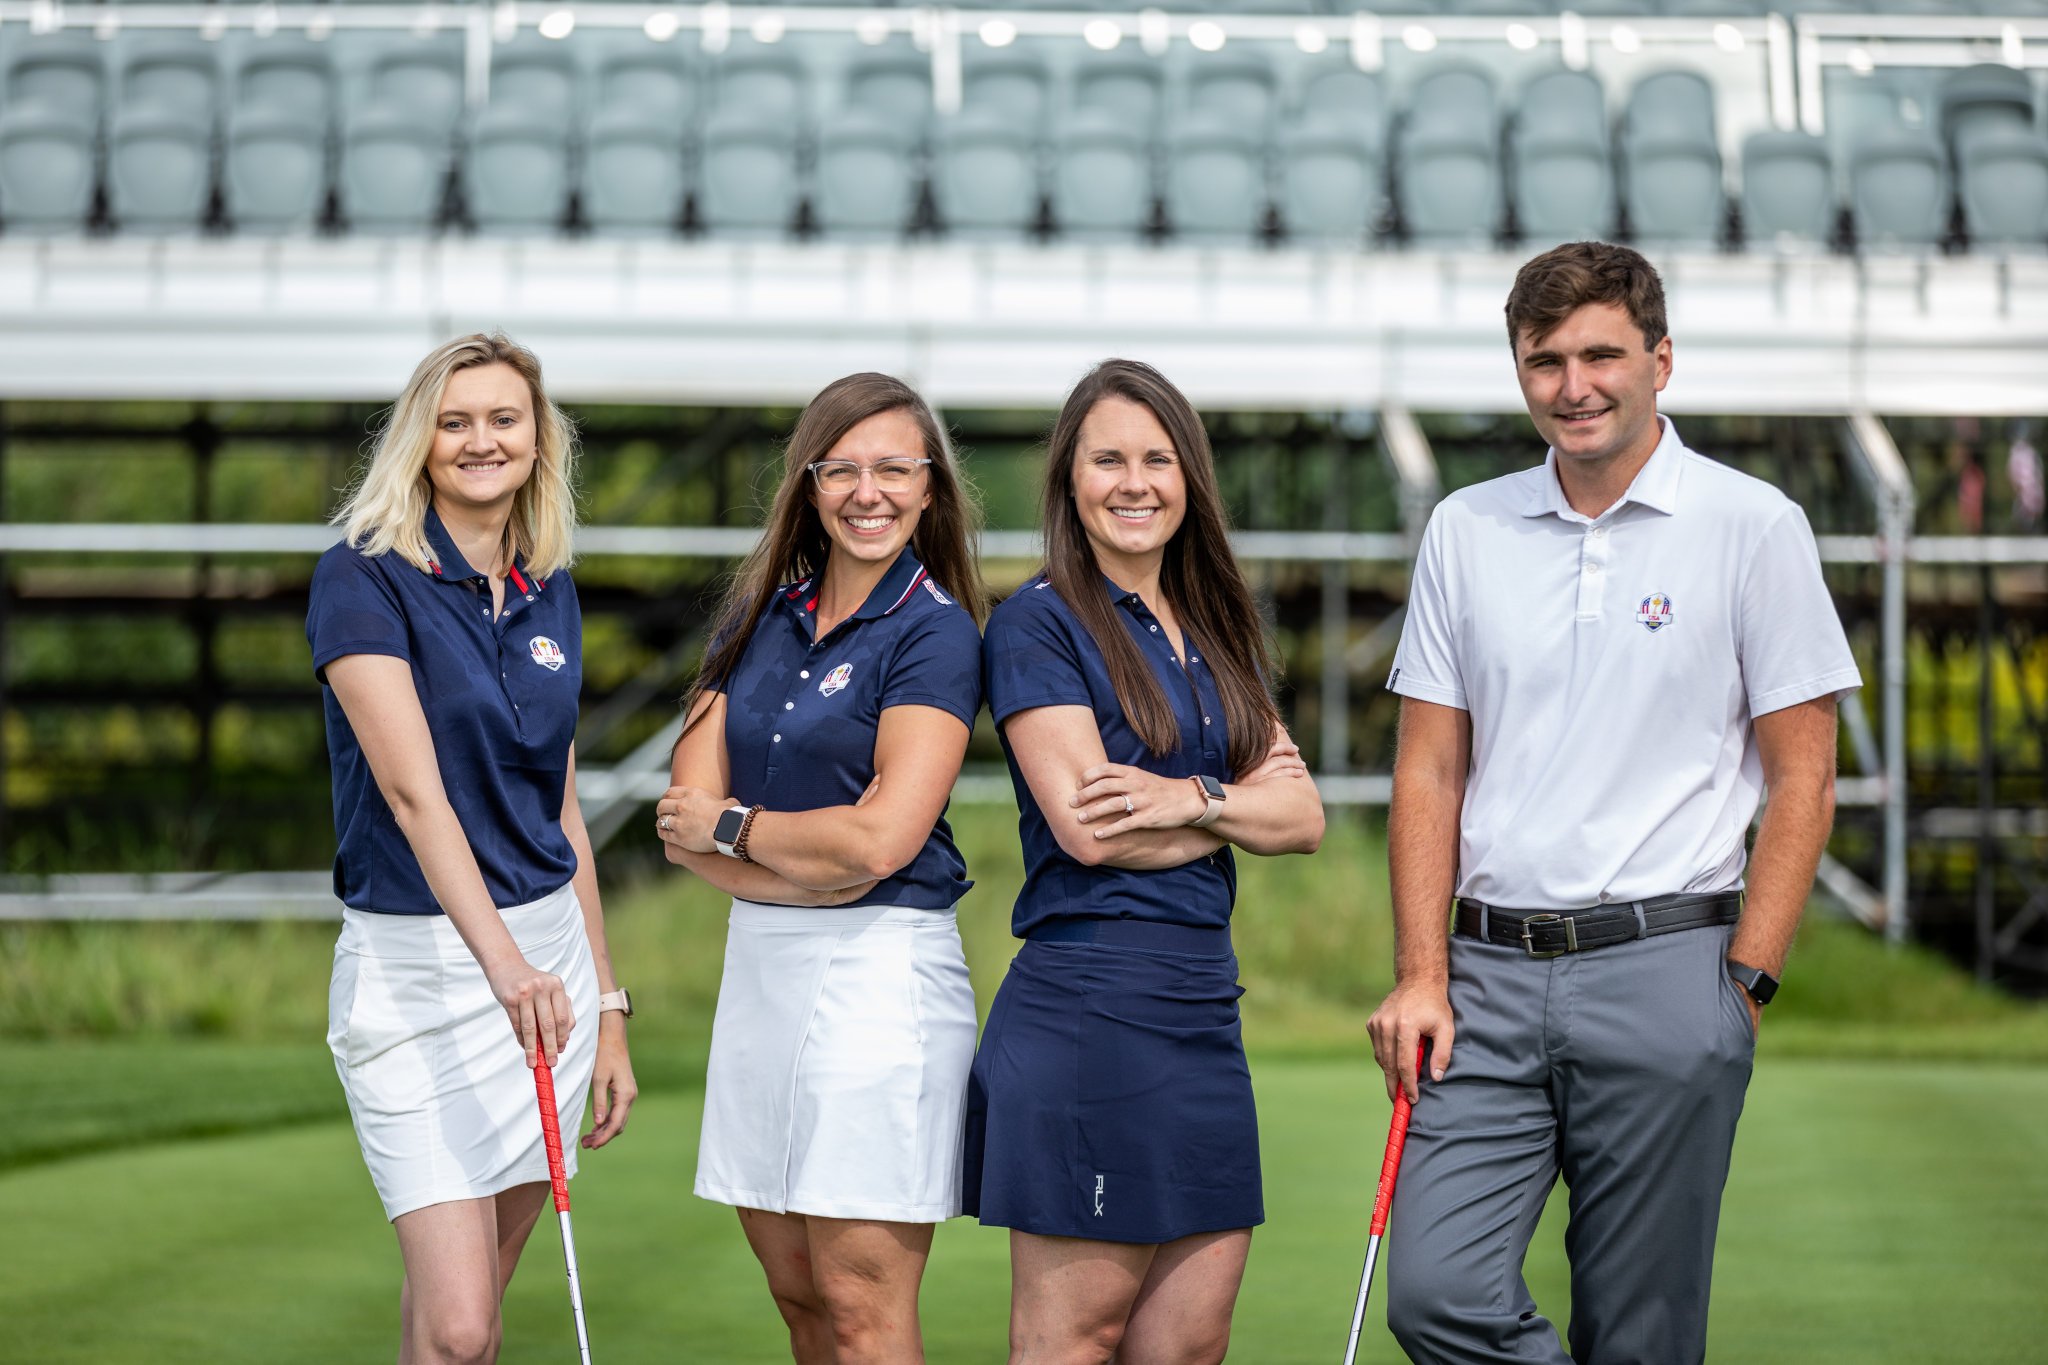 Lakeland University alumni who were on the Ryder Cup planning team